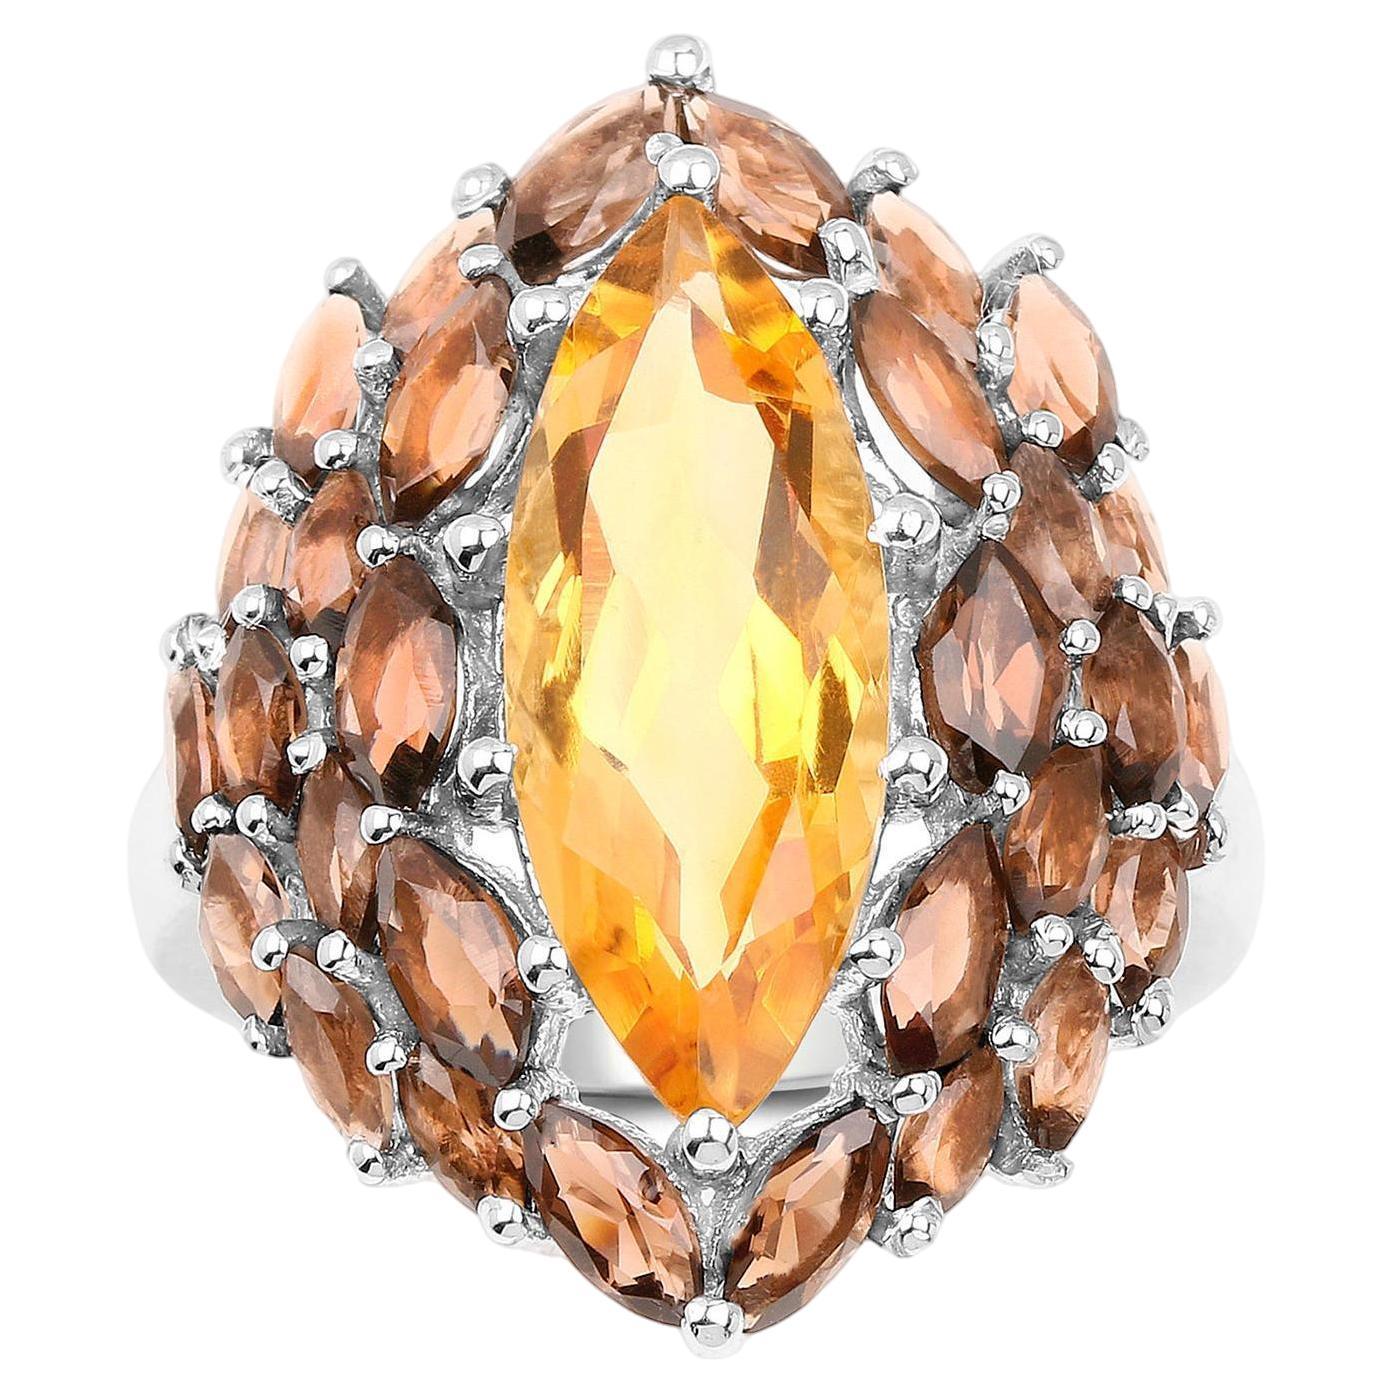 Marquise Cut Cocktail Ring Citrine and Smoky Quartz 6.20 Carats